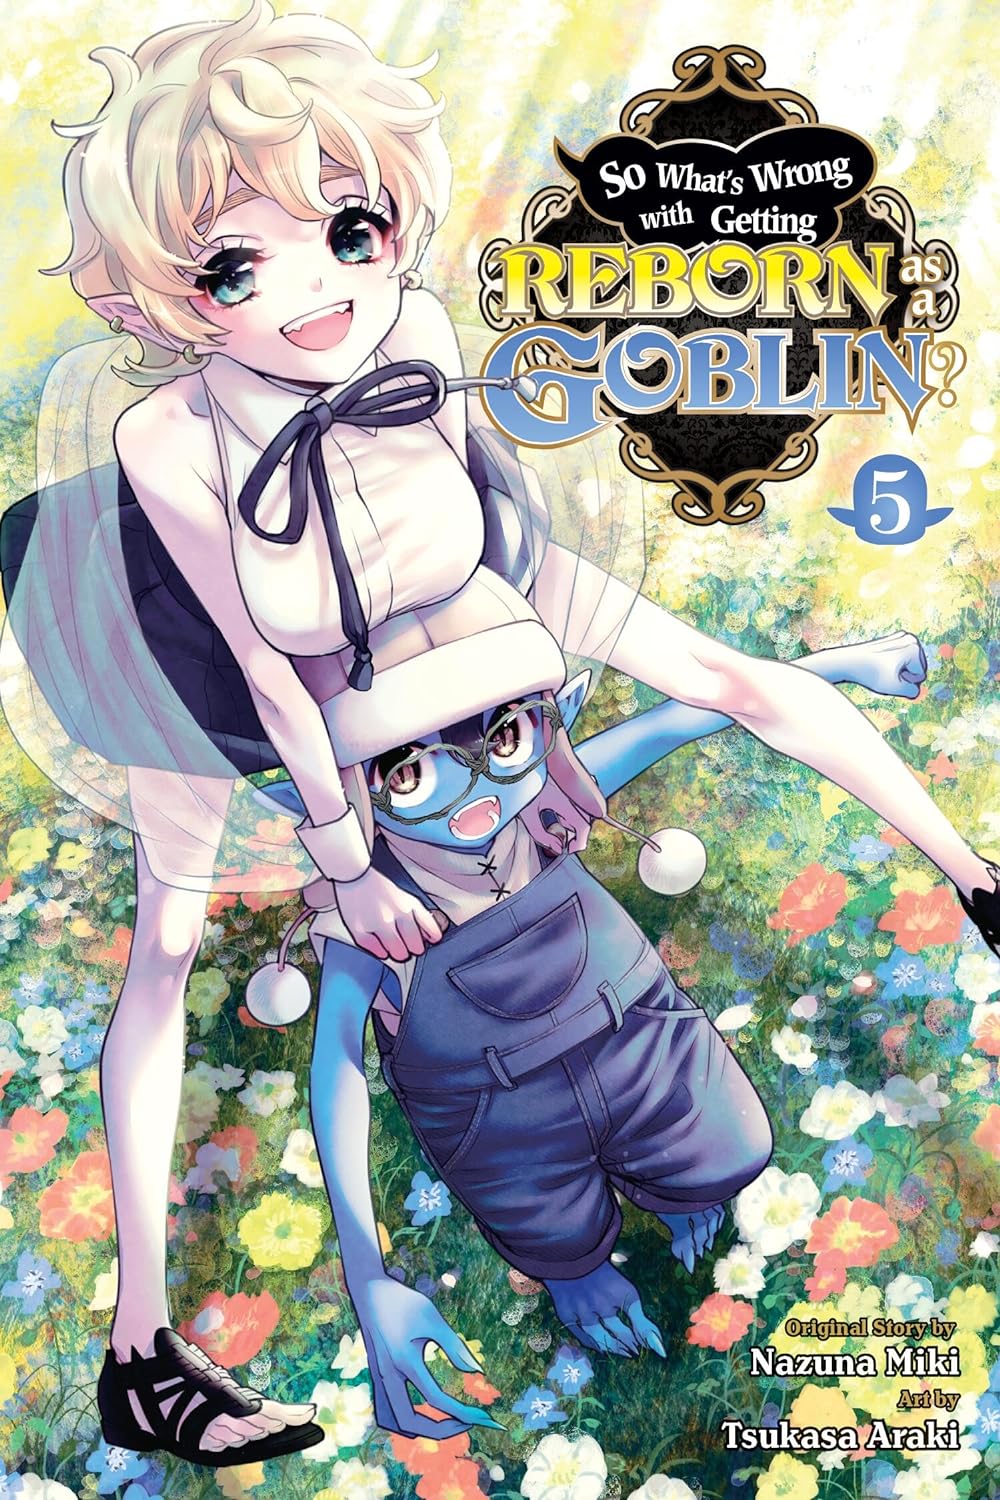 So What's Wrong with Getting Reborn as a Goblin? Vol. 05